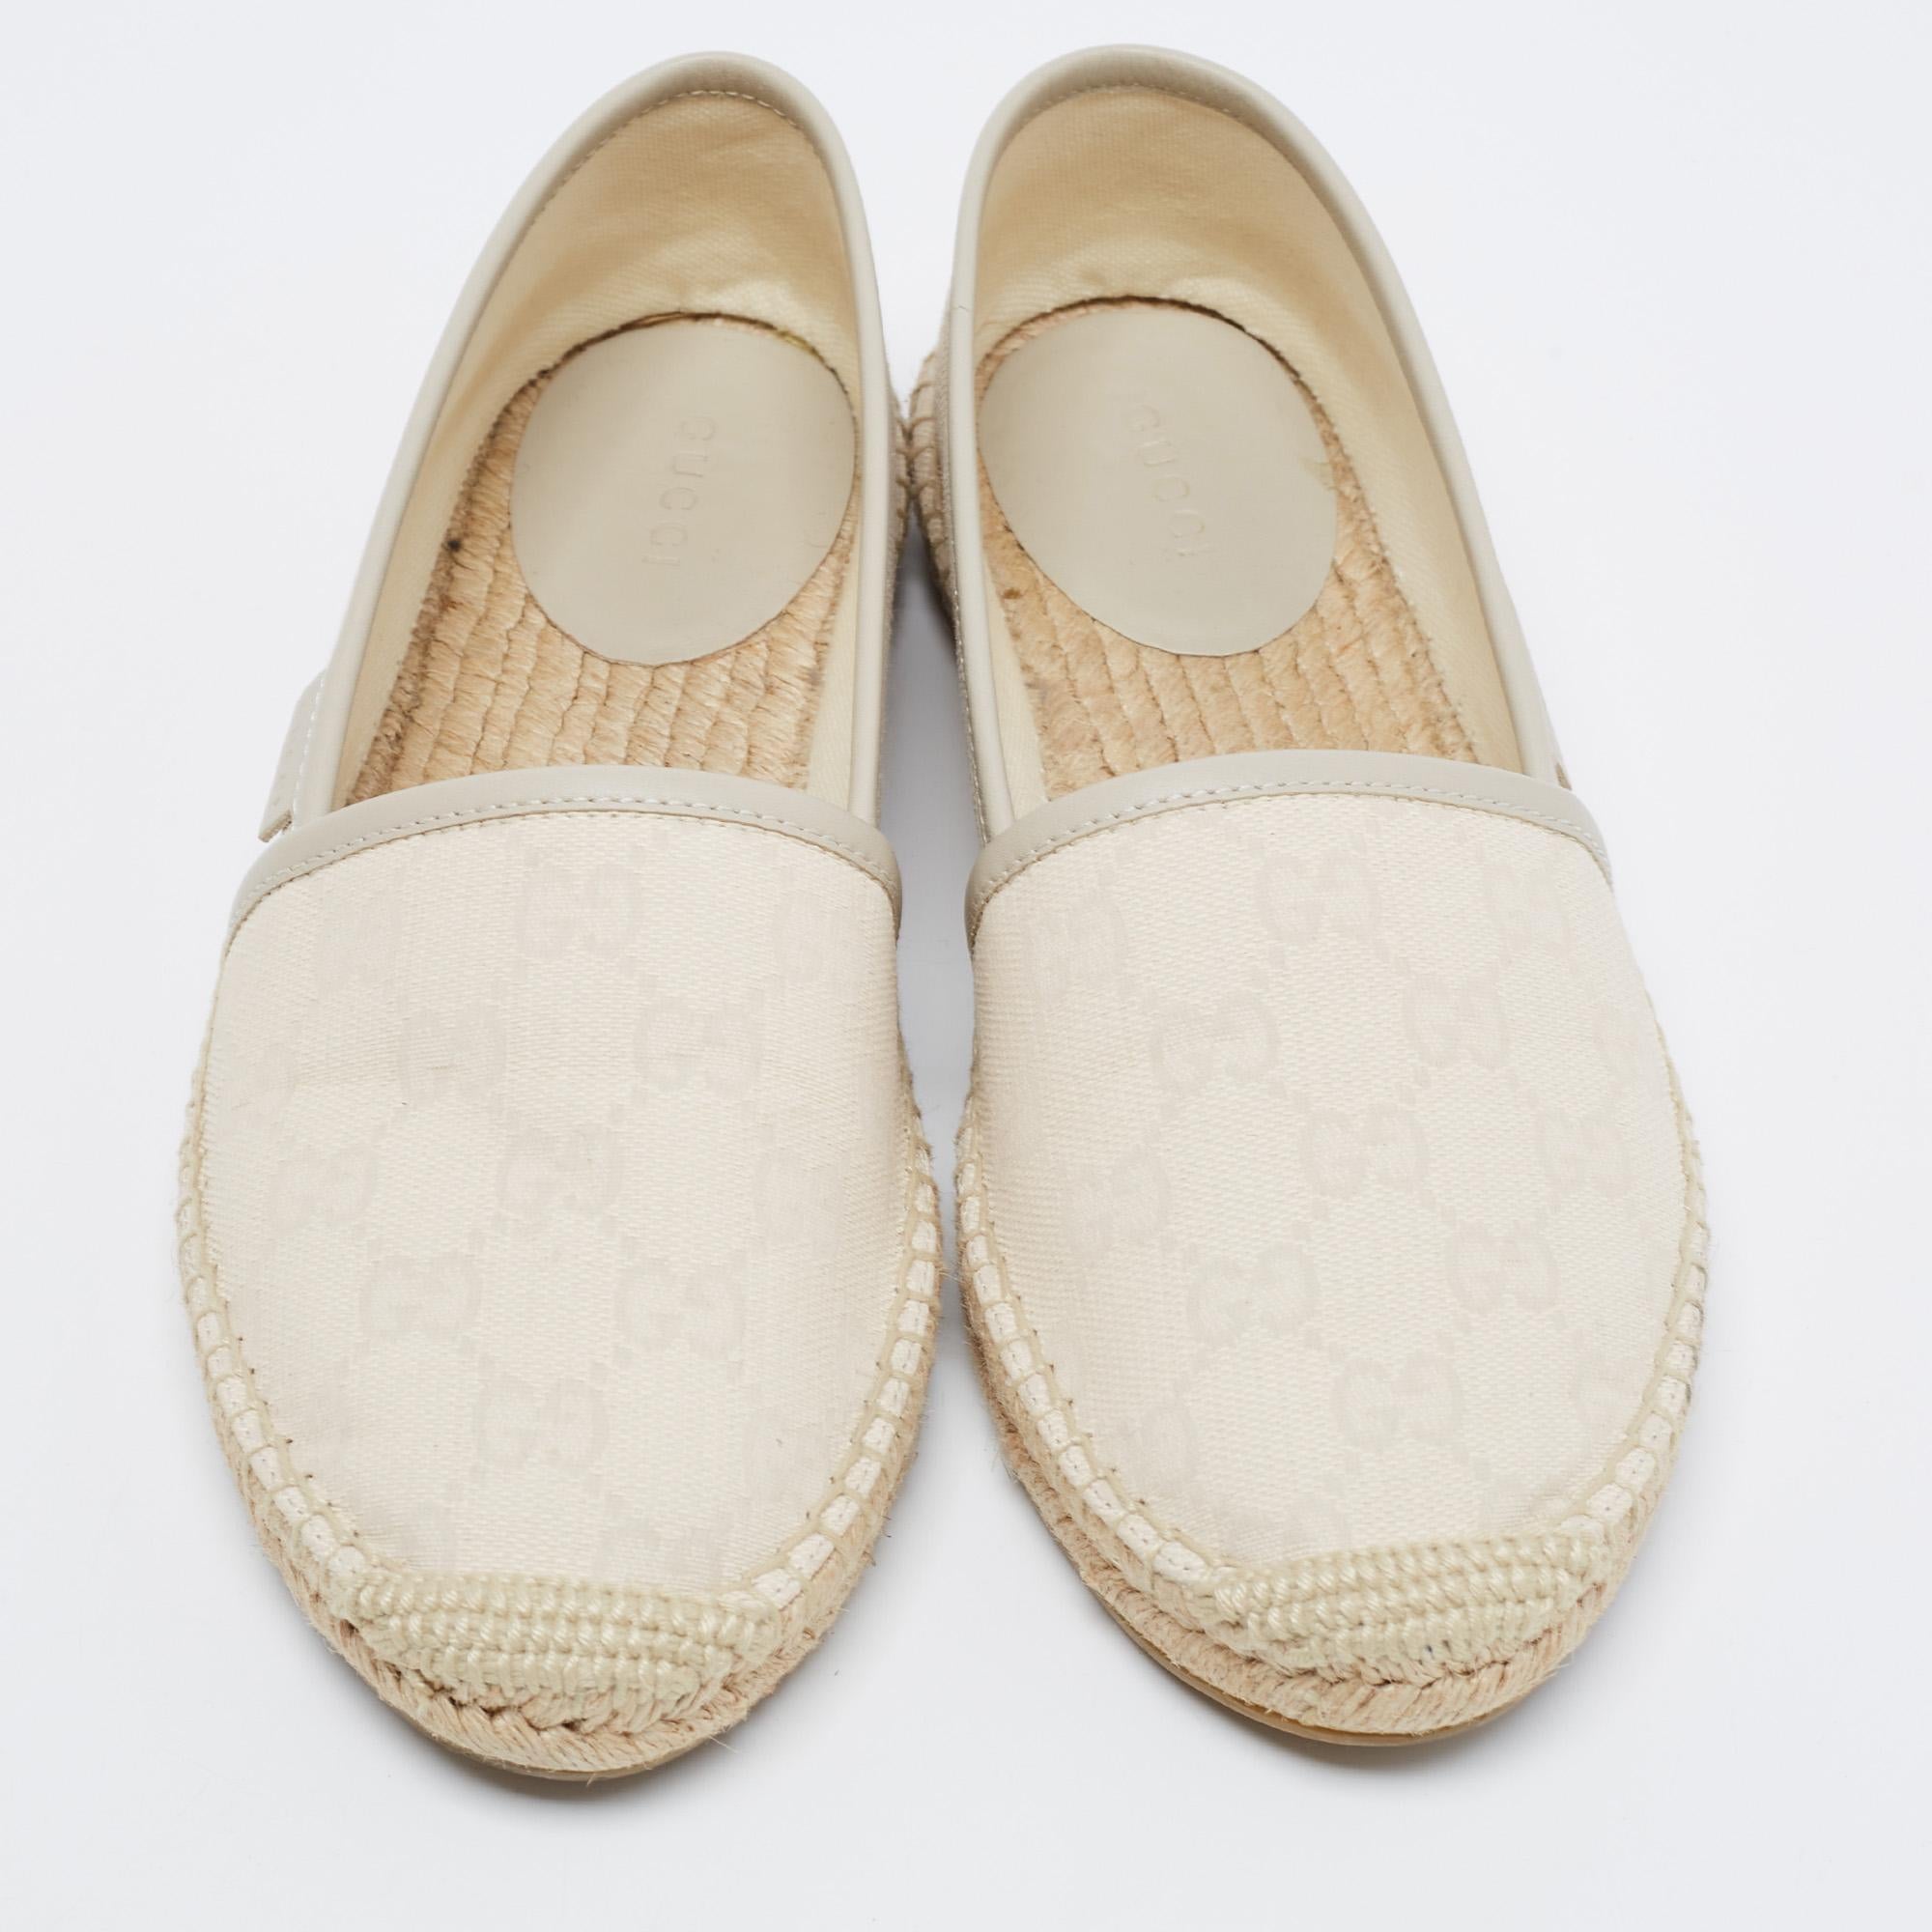 This summer, step out in style with these espadrilles from the House of Gucci. They are crafted using GG canvas and leather and are equipped with an easy slip-on style. Achieve a chic style by slipping these on with espadrilles with pastel